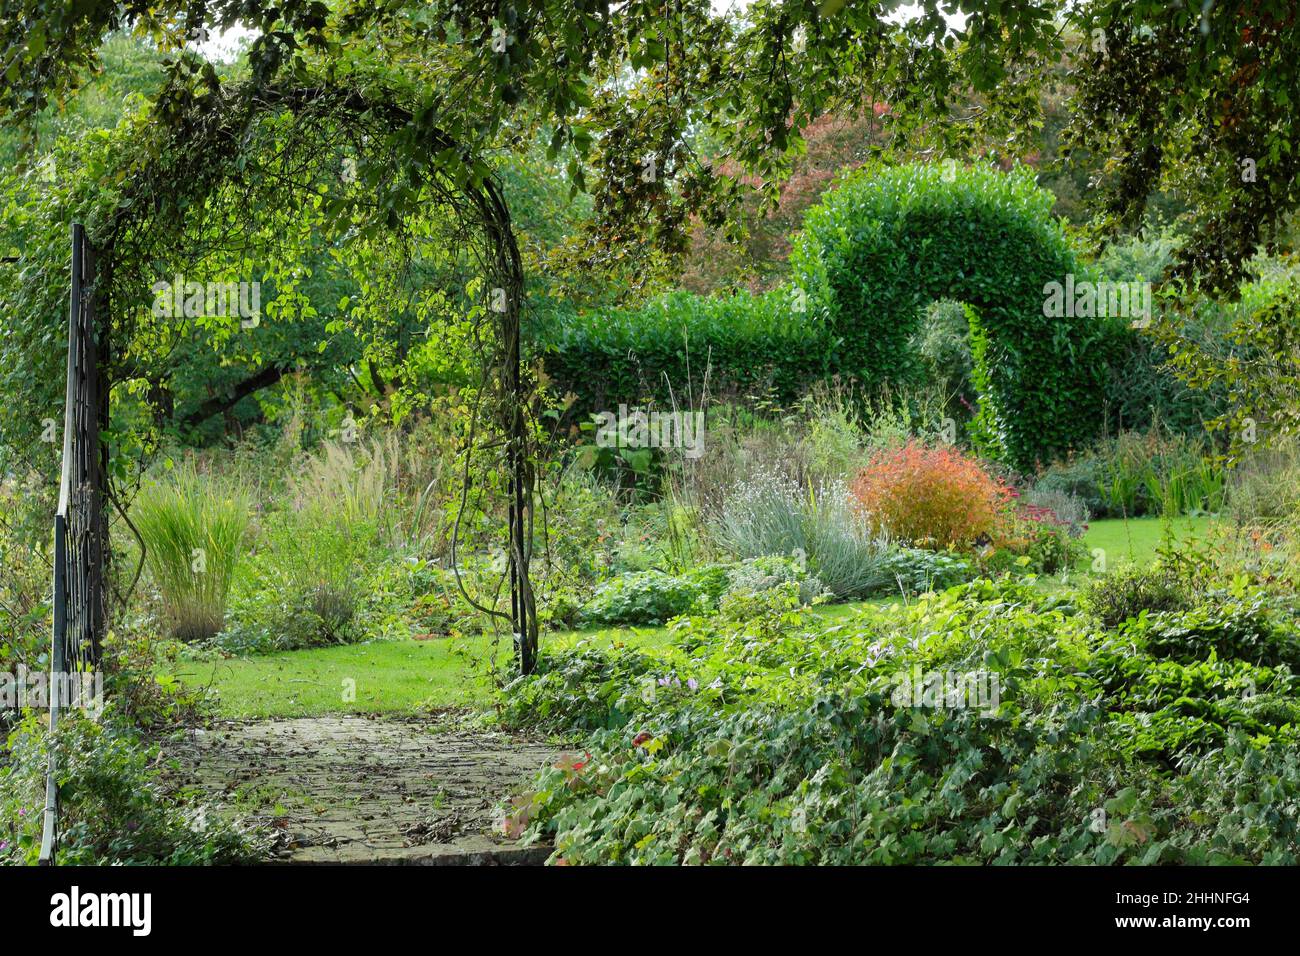 Garden arch.Garden arch adds visual interest and serves to divide zones between a woodland garden and perennial beds. Autumn. UK Stock Photo